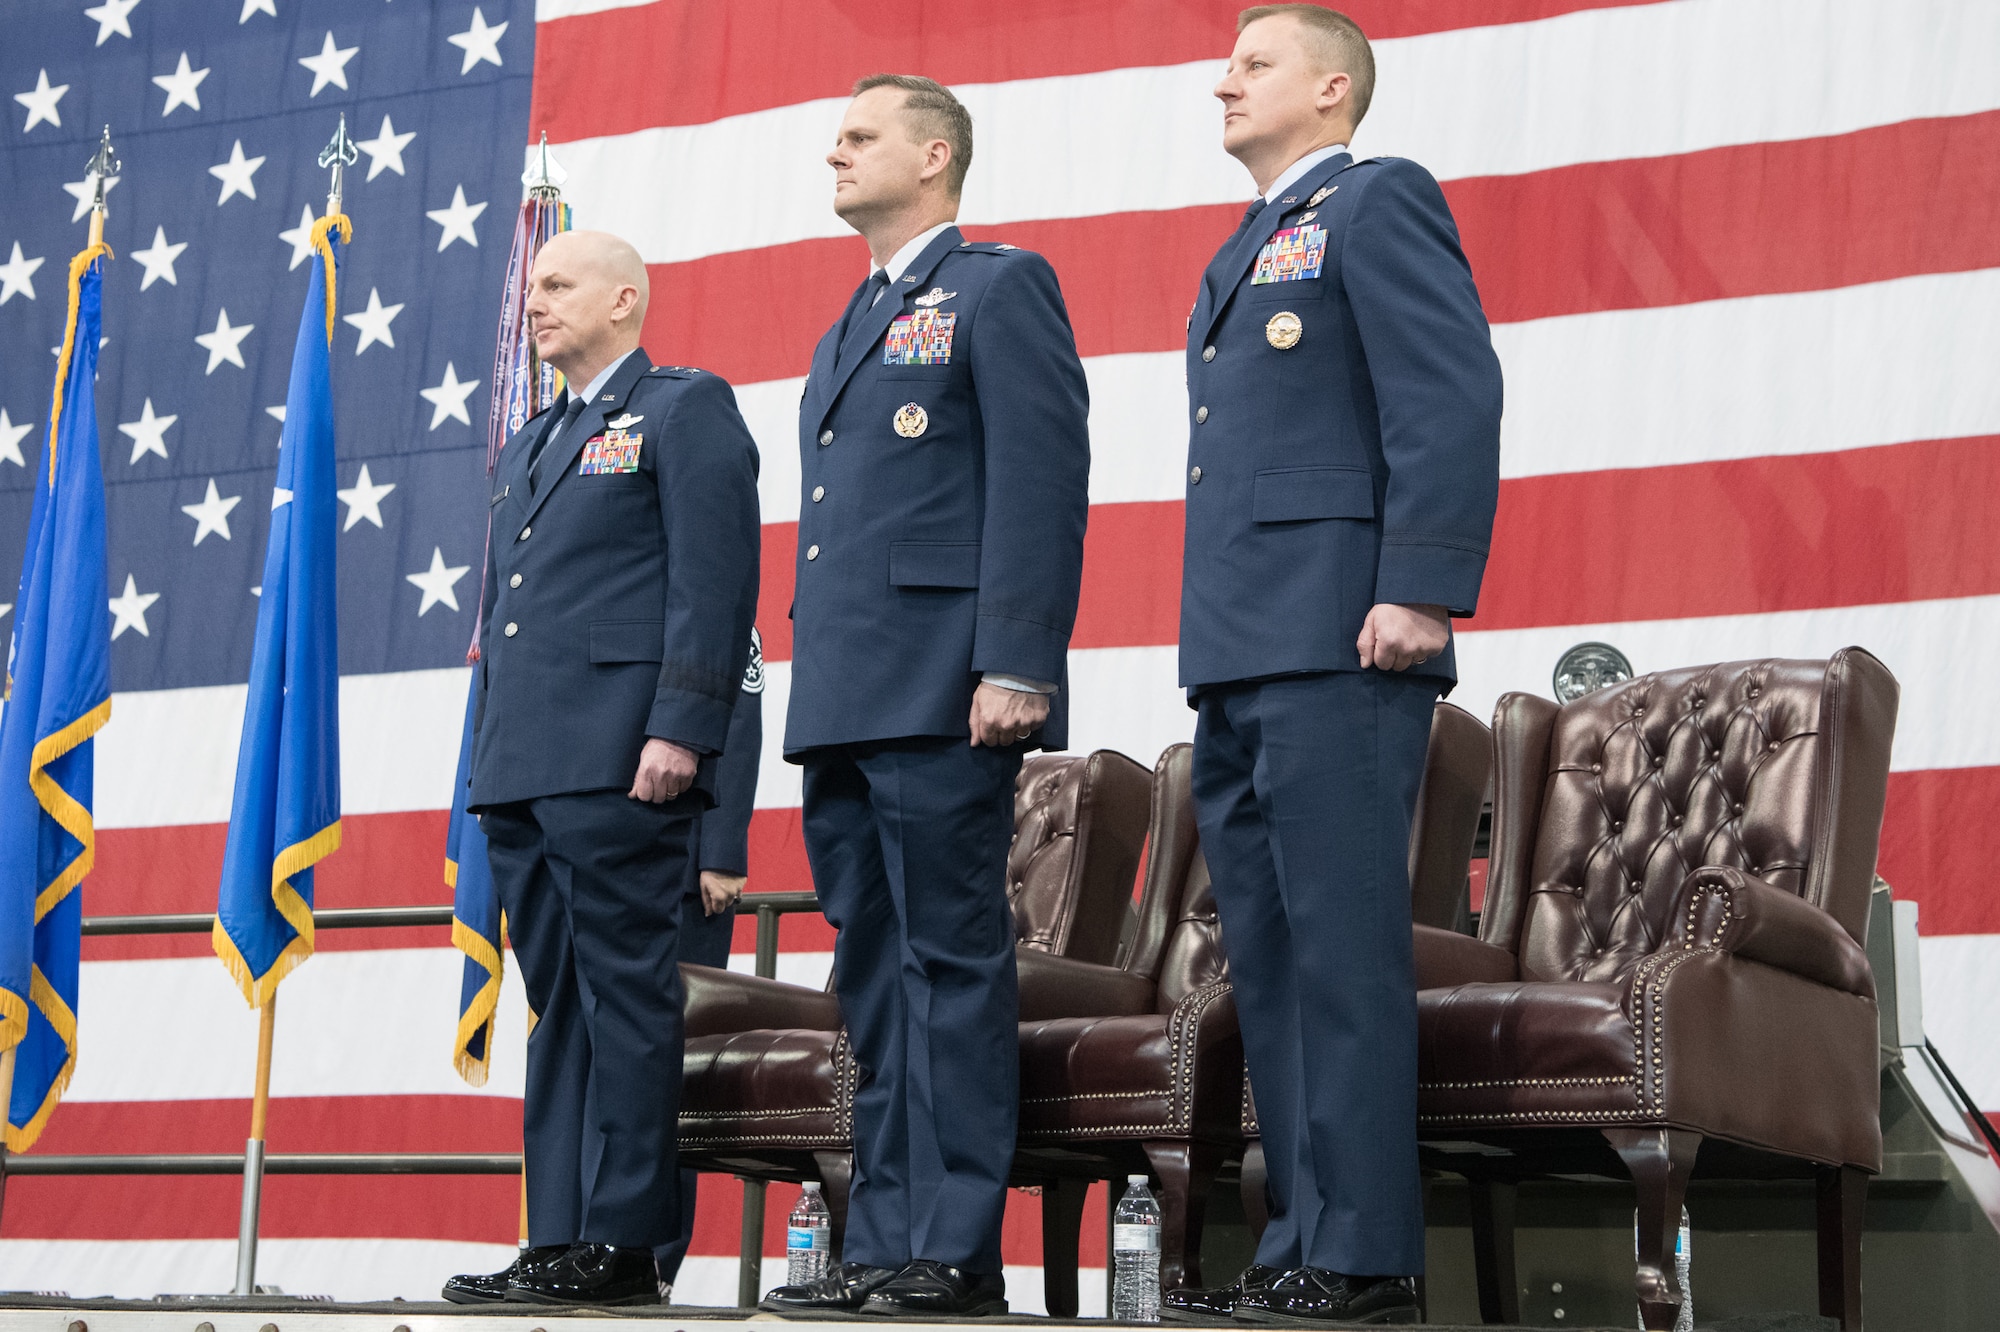 From left, Maj. Gen. Sam C. Barrett, 18th Air Force commander, Col. Joel Safranek, outgoing 436 Airlift Wing commander and  Col. Matthew Jones, incoming 436th AW commander, stand at
attention during the 436th AW Change of Command ceremony
Jan 7, 2020, at Dover Air Force Base, Del. Safranek relinquished command to Jones in a ceremony attended by friends, family, members of Team Dover, local civic leaders and distinguished visitors. (U.S. Air Force photo by Mauricio Campino)